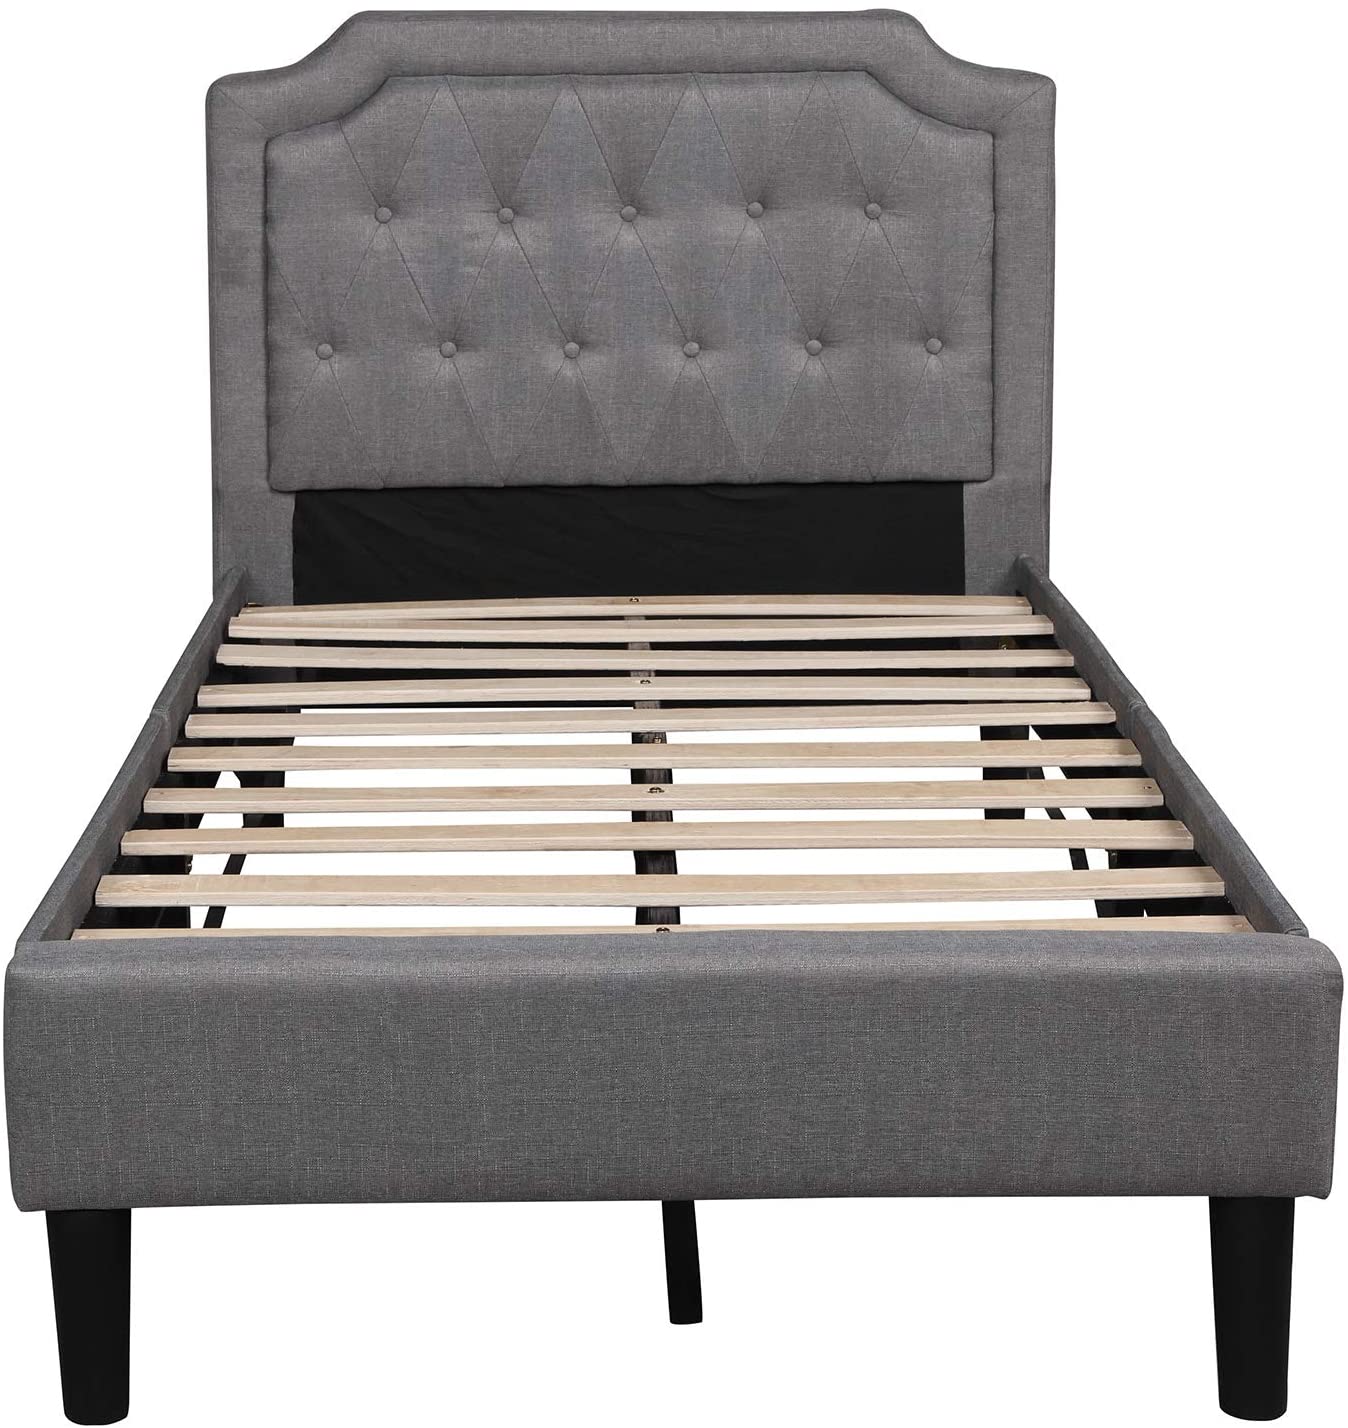 Best Twin XL Bed Frame With Headboard - Review & Buying Guide